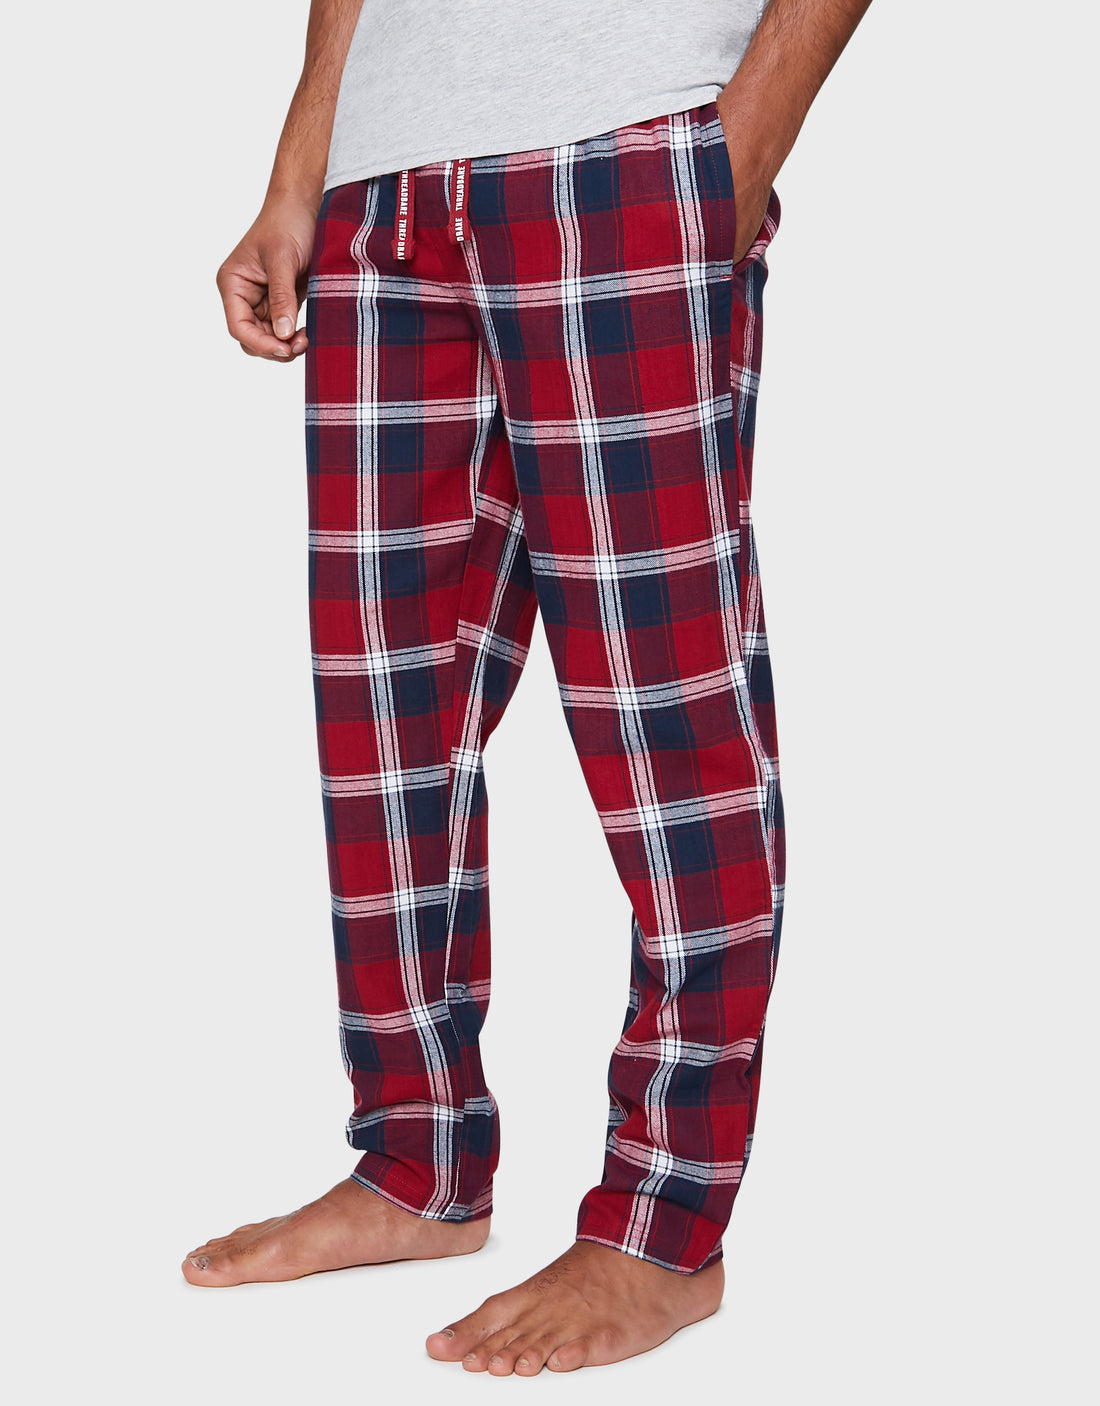 Men's Red & Blue Check Loungewear Pyjama Flannel Trousers (2 Pack ...